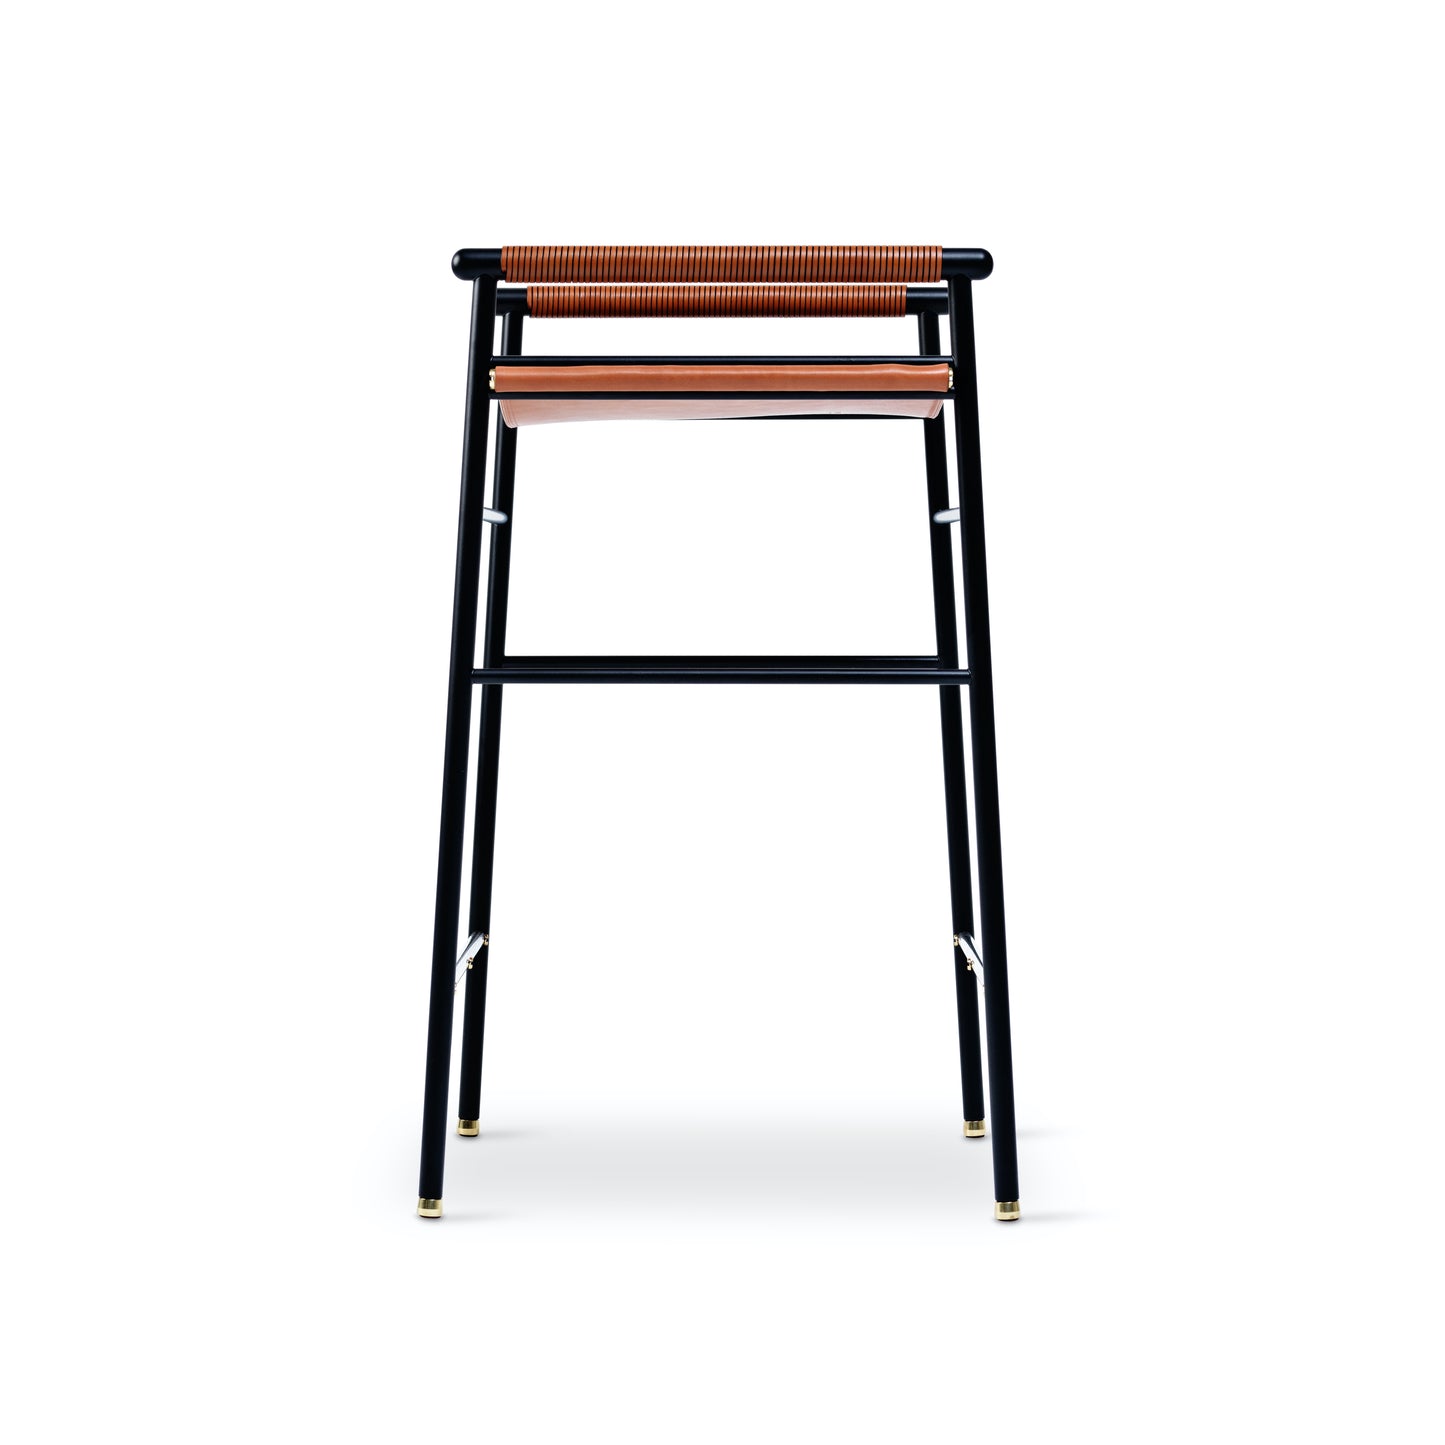 Repose Bar Stool - Handcrafted with cowhide leather and brass accents